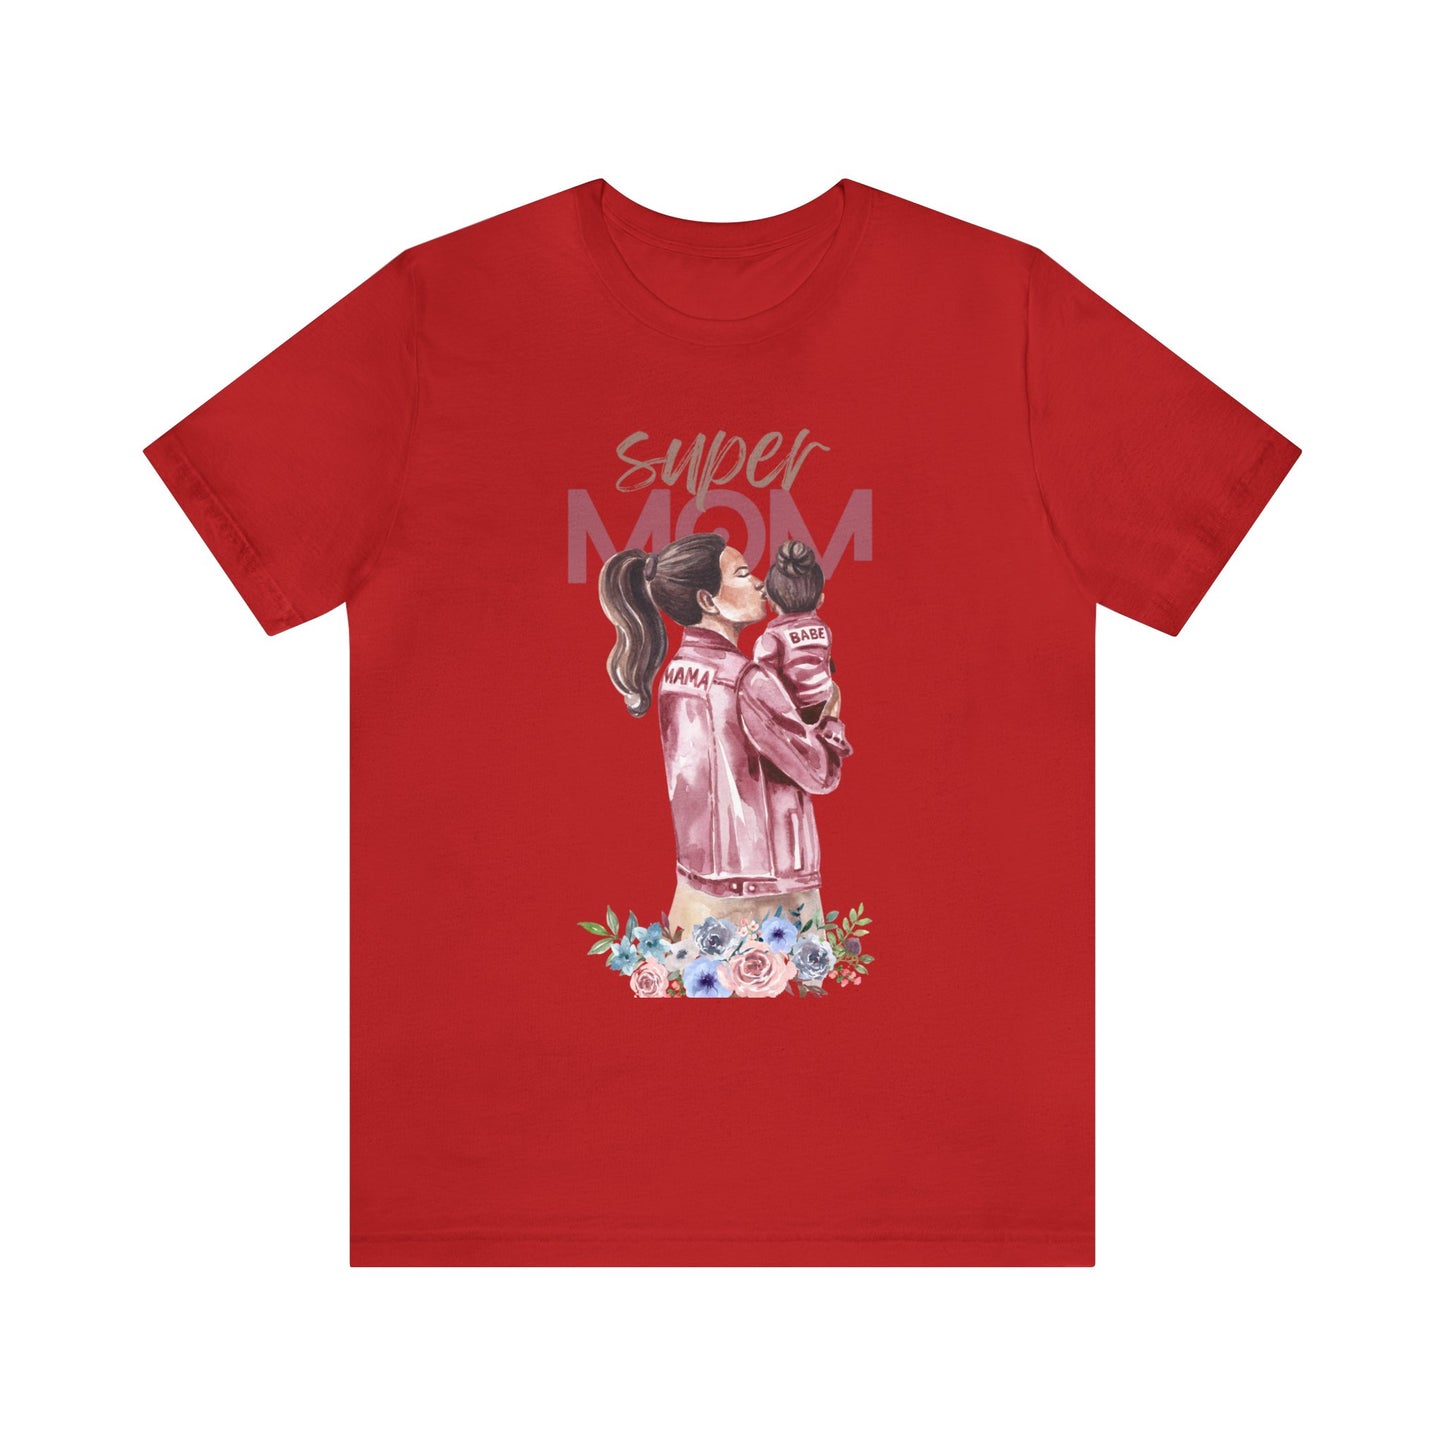 Super Mom - T Shirt for Women, T shirts for Mothers